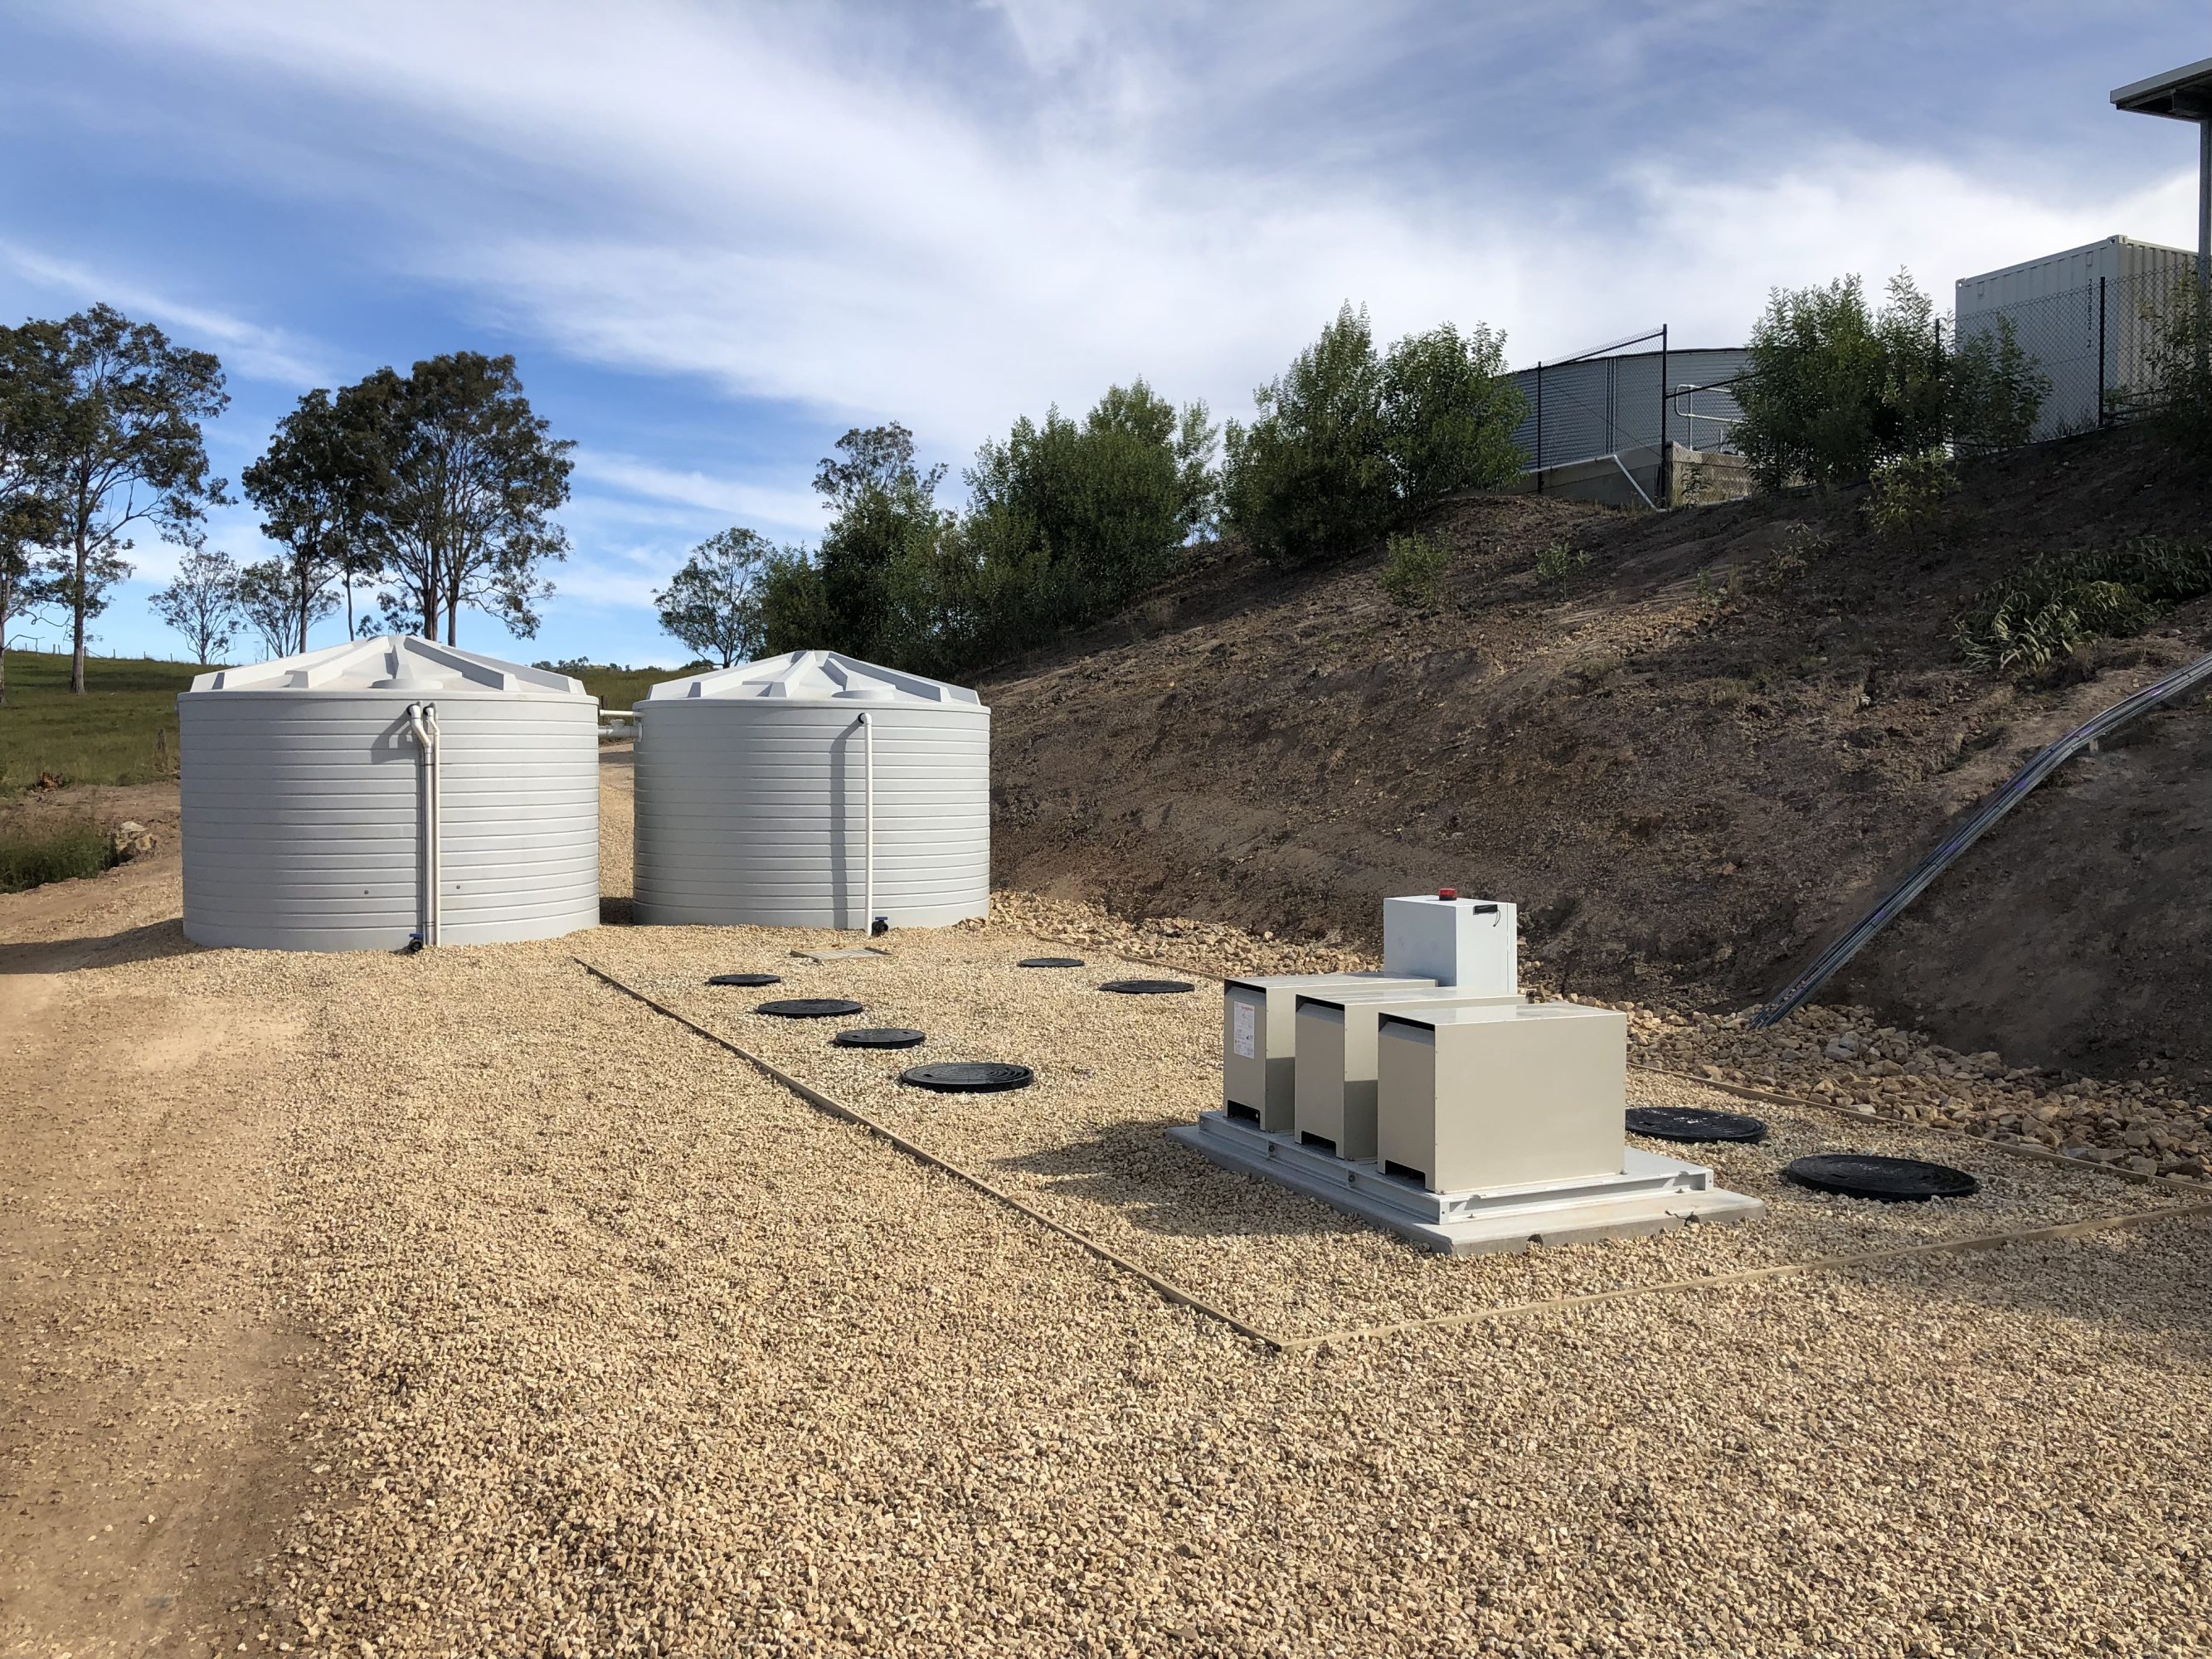 The completed onsite wastewater system is more compact, provides a high level of treatment and is easy to maintain.